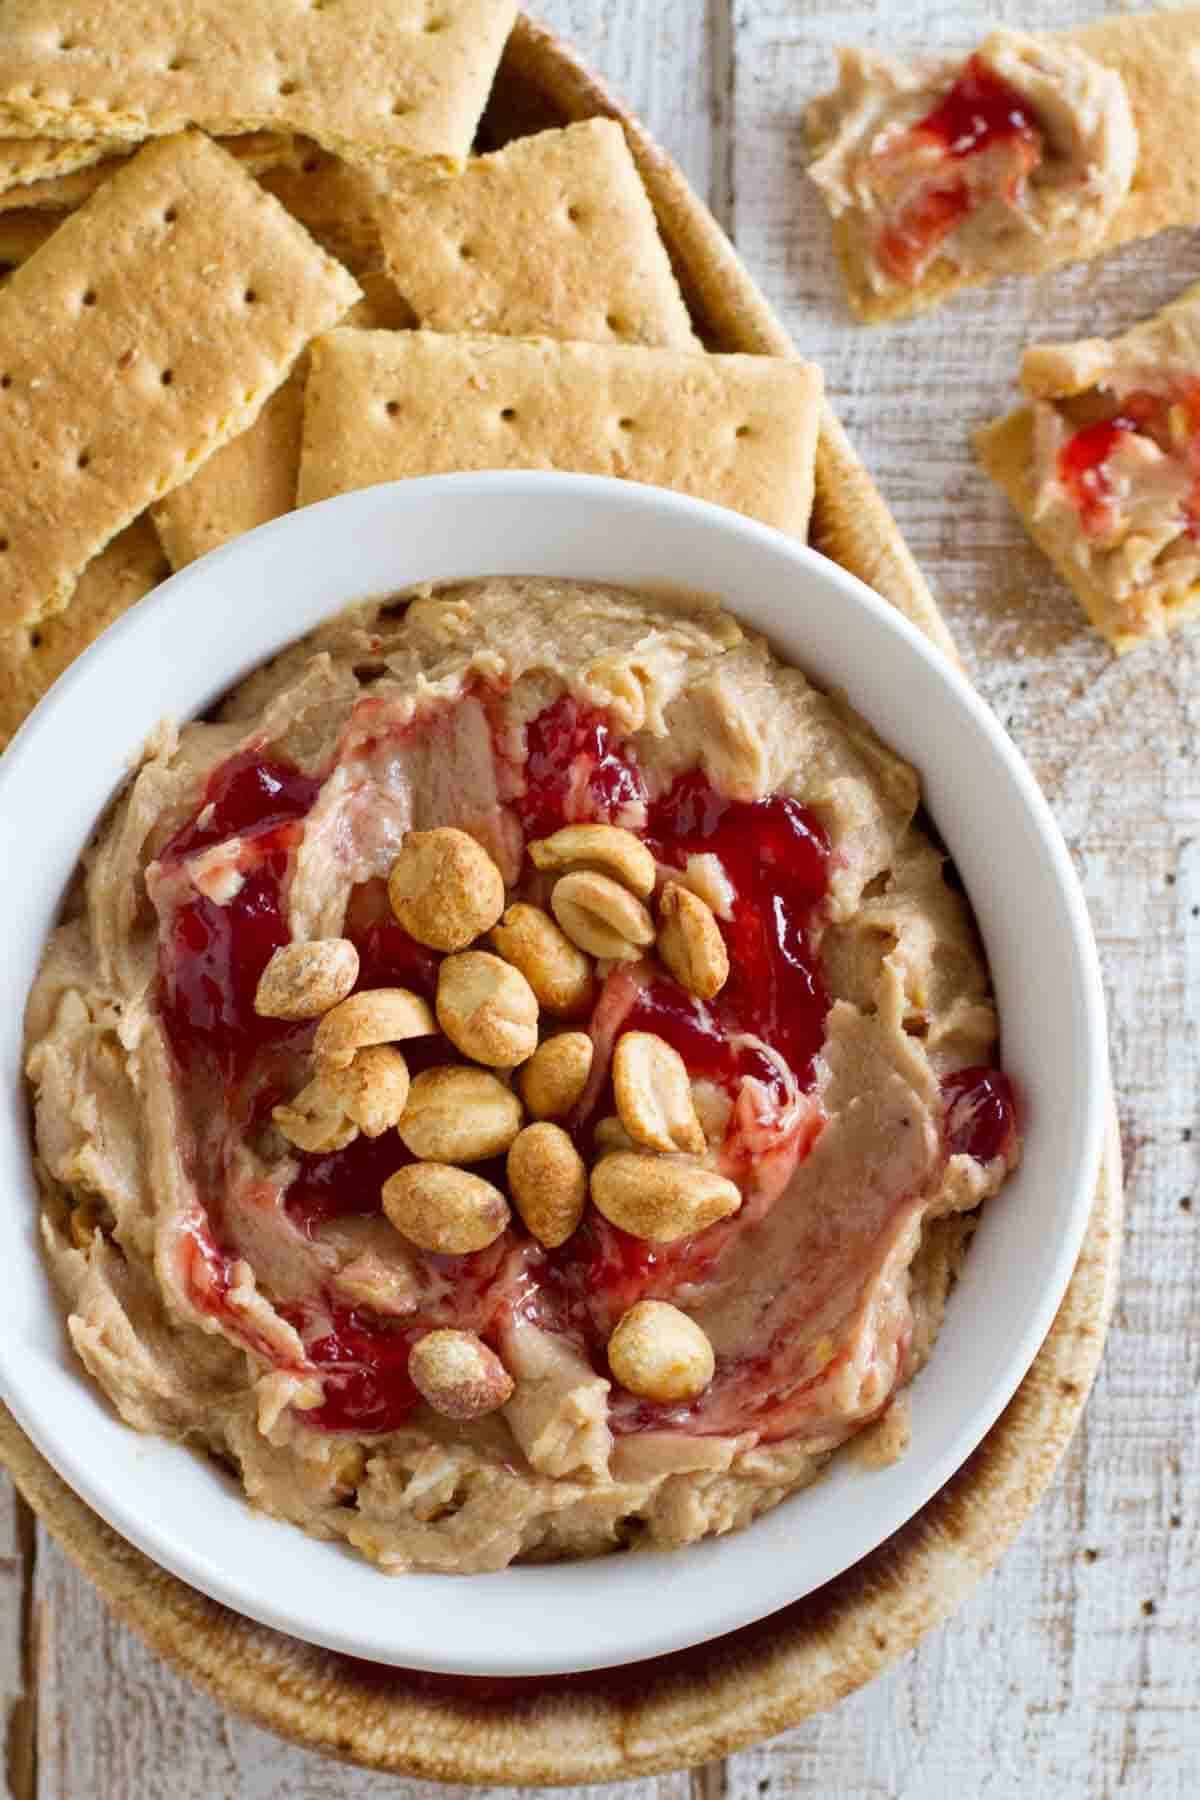 Peanut Butter and Jelly Dip served with graham crackers.